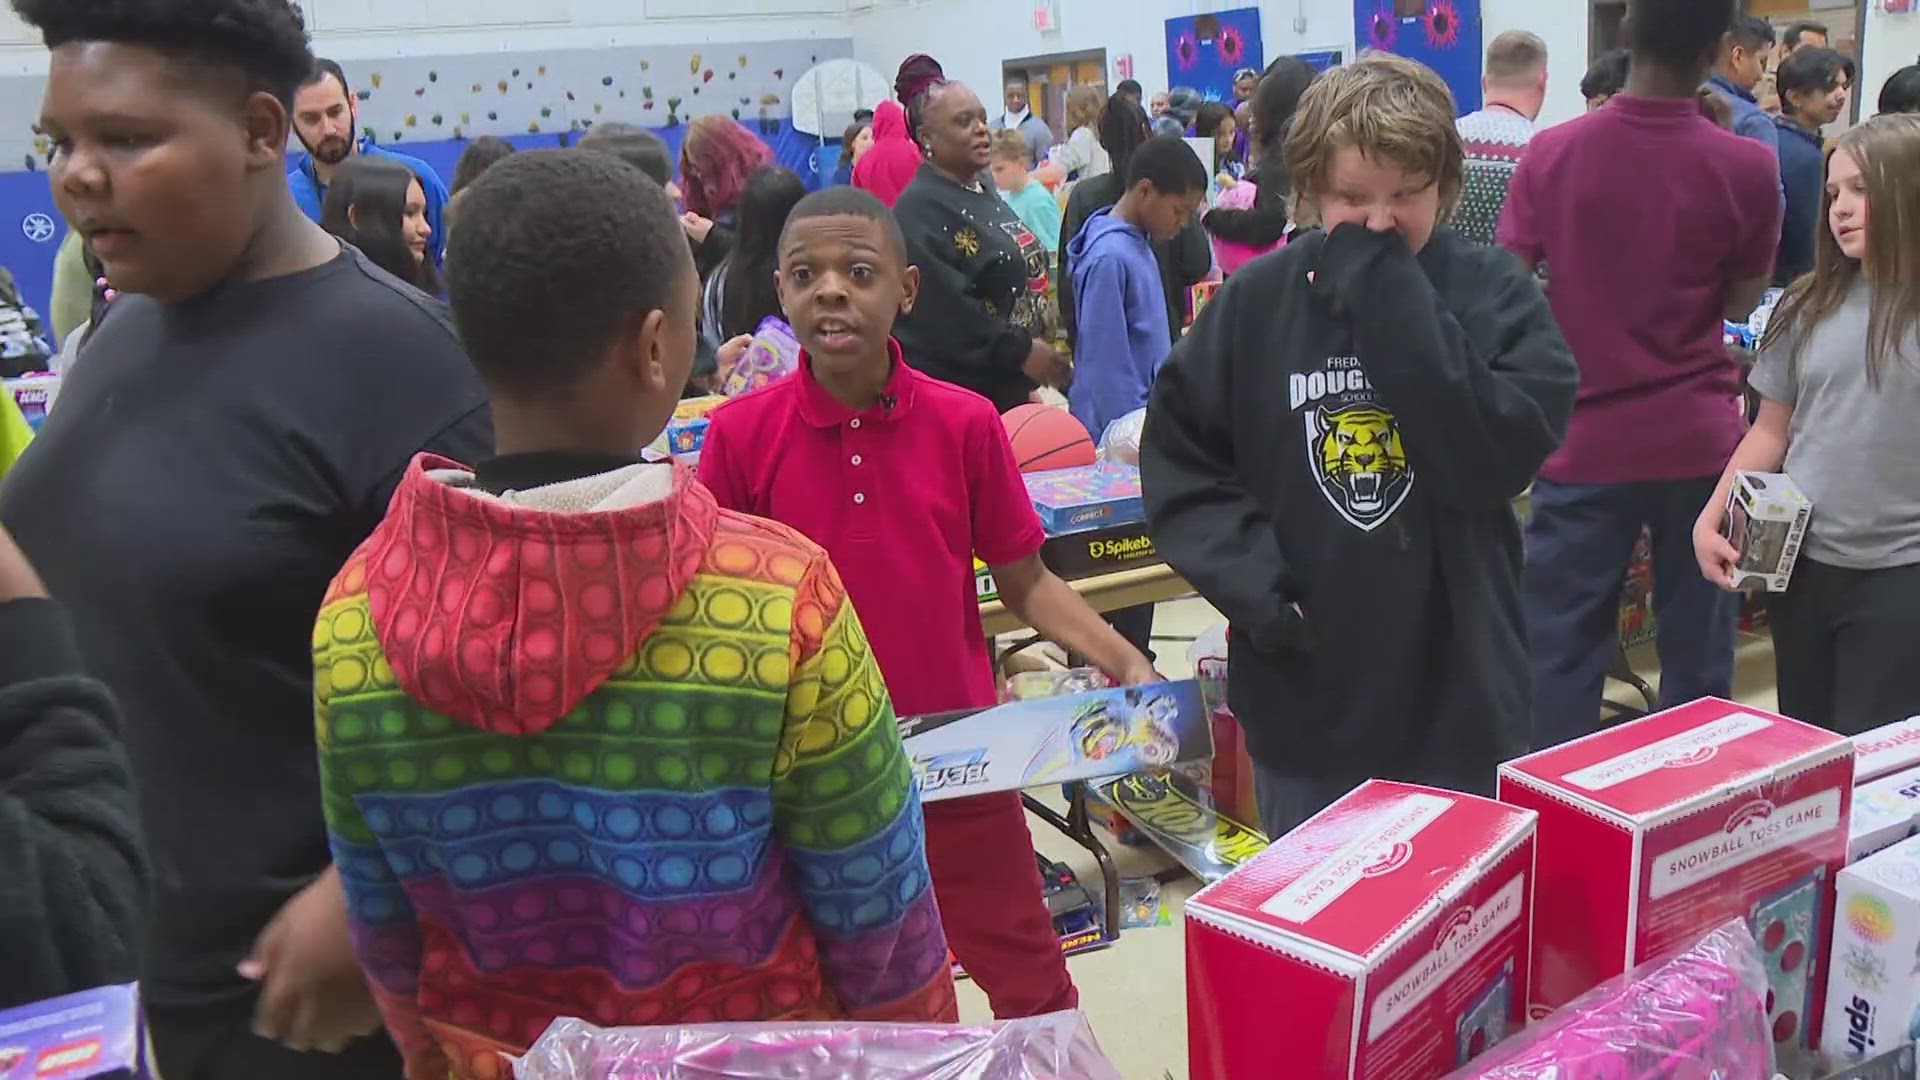 Christmas came early for hundreds of kids at IPS. And it's all thanks to a former Colts player and lots of local support.